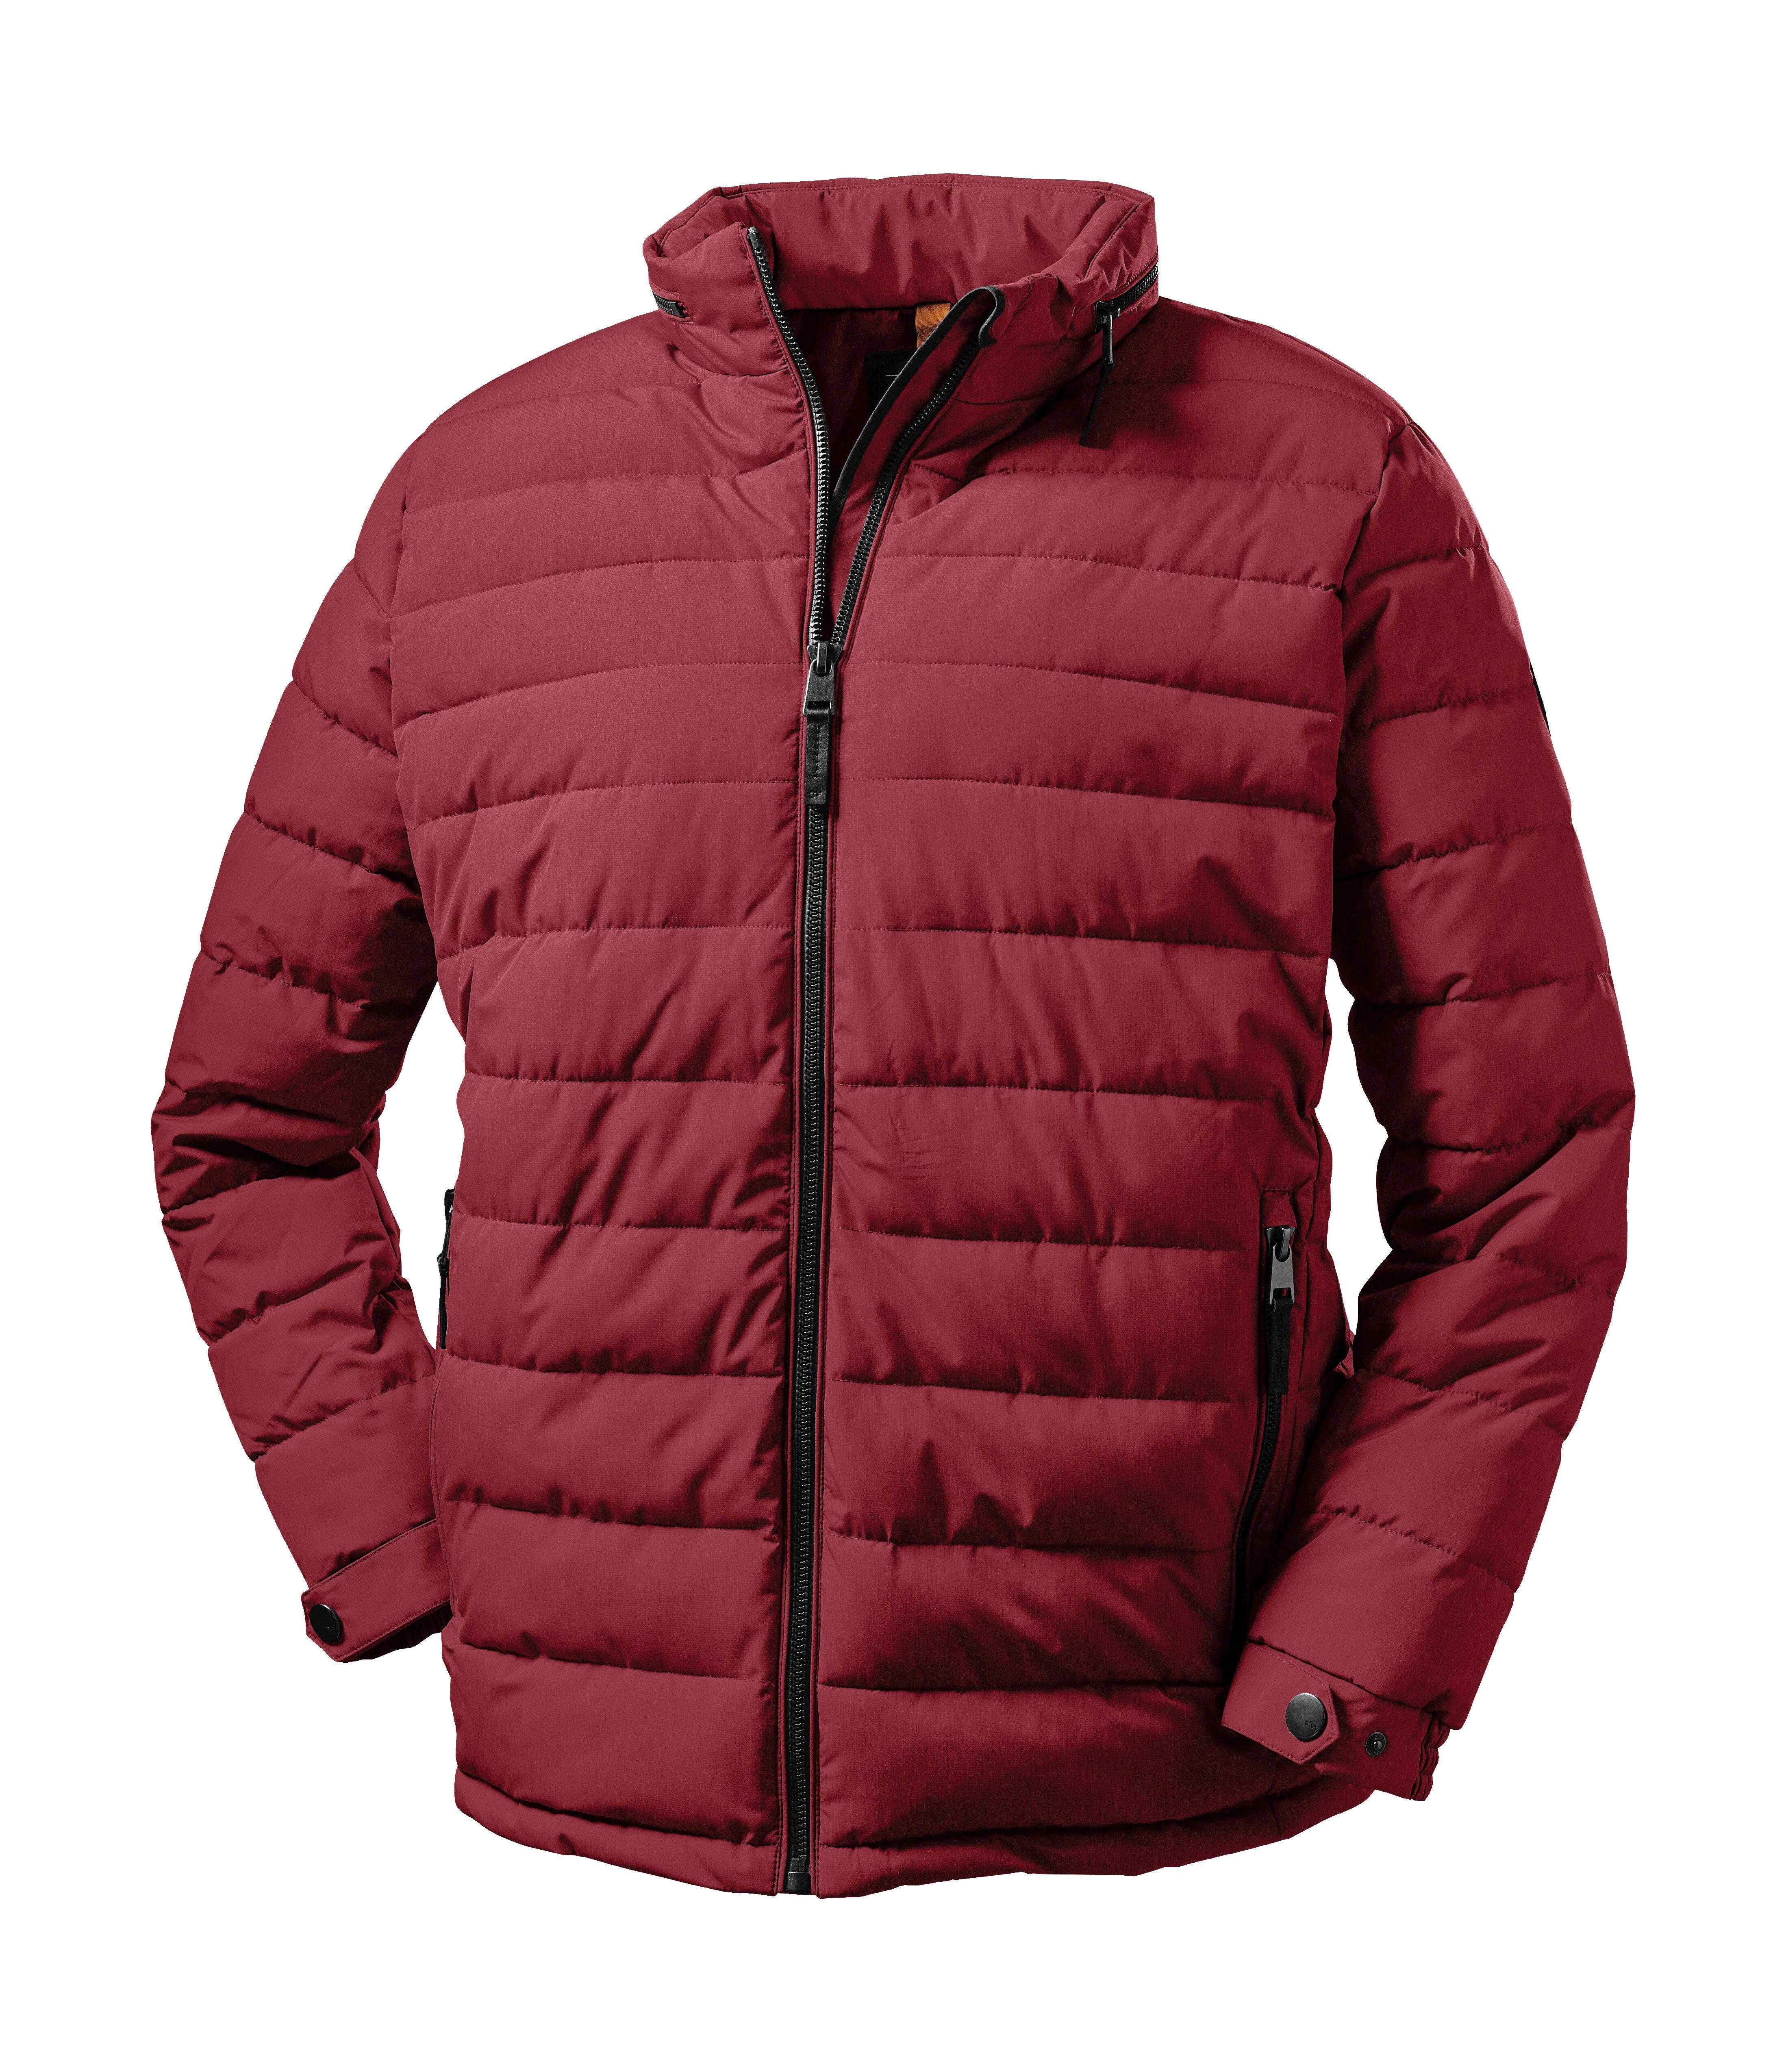 MN Steppjacke STOY Quilted A JCKT rot